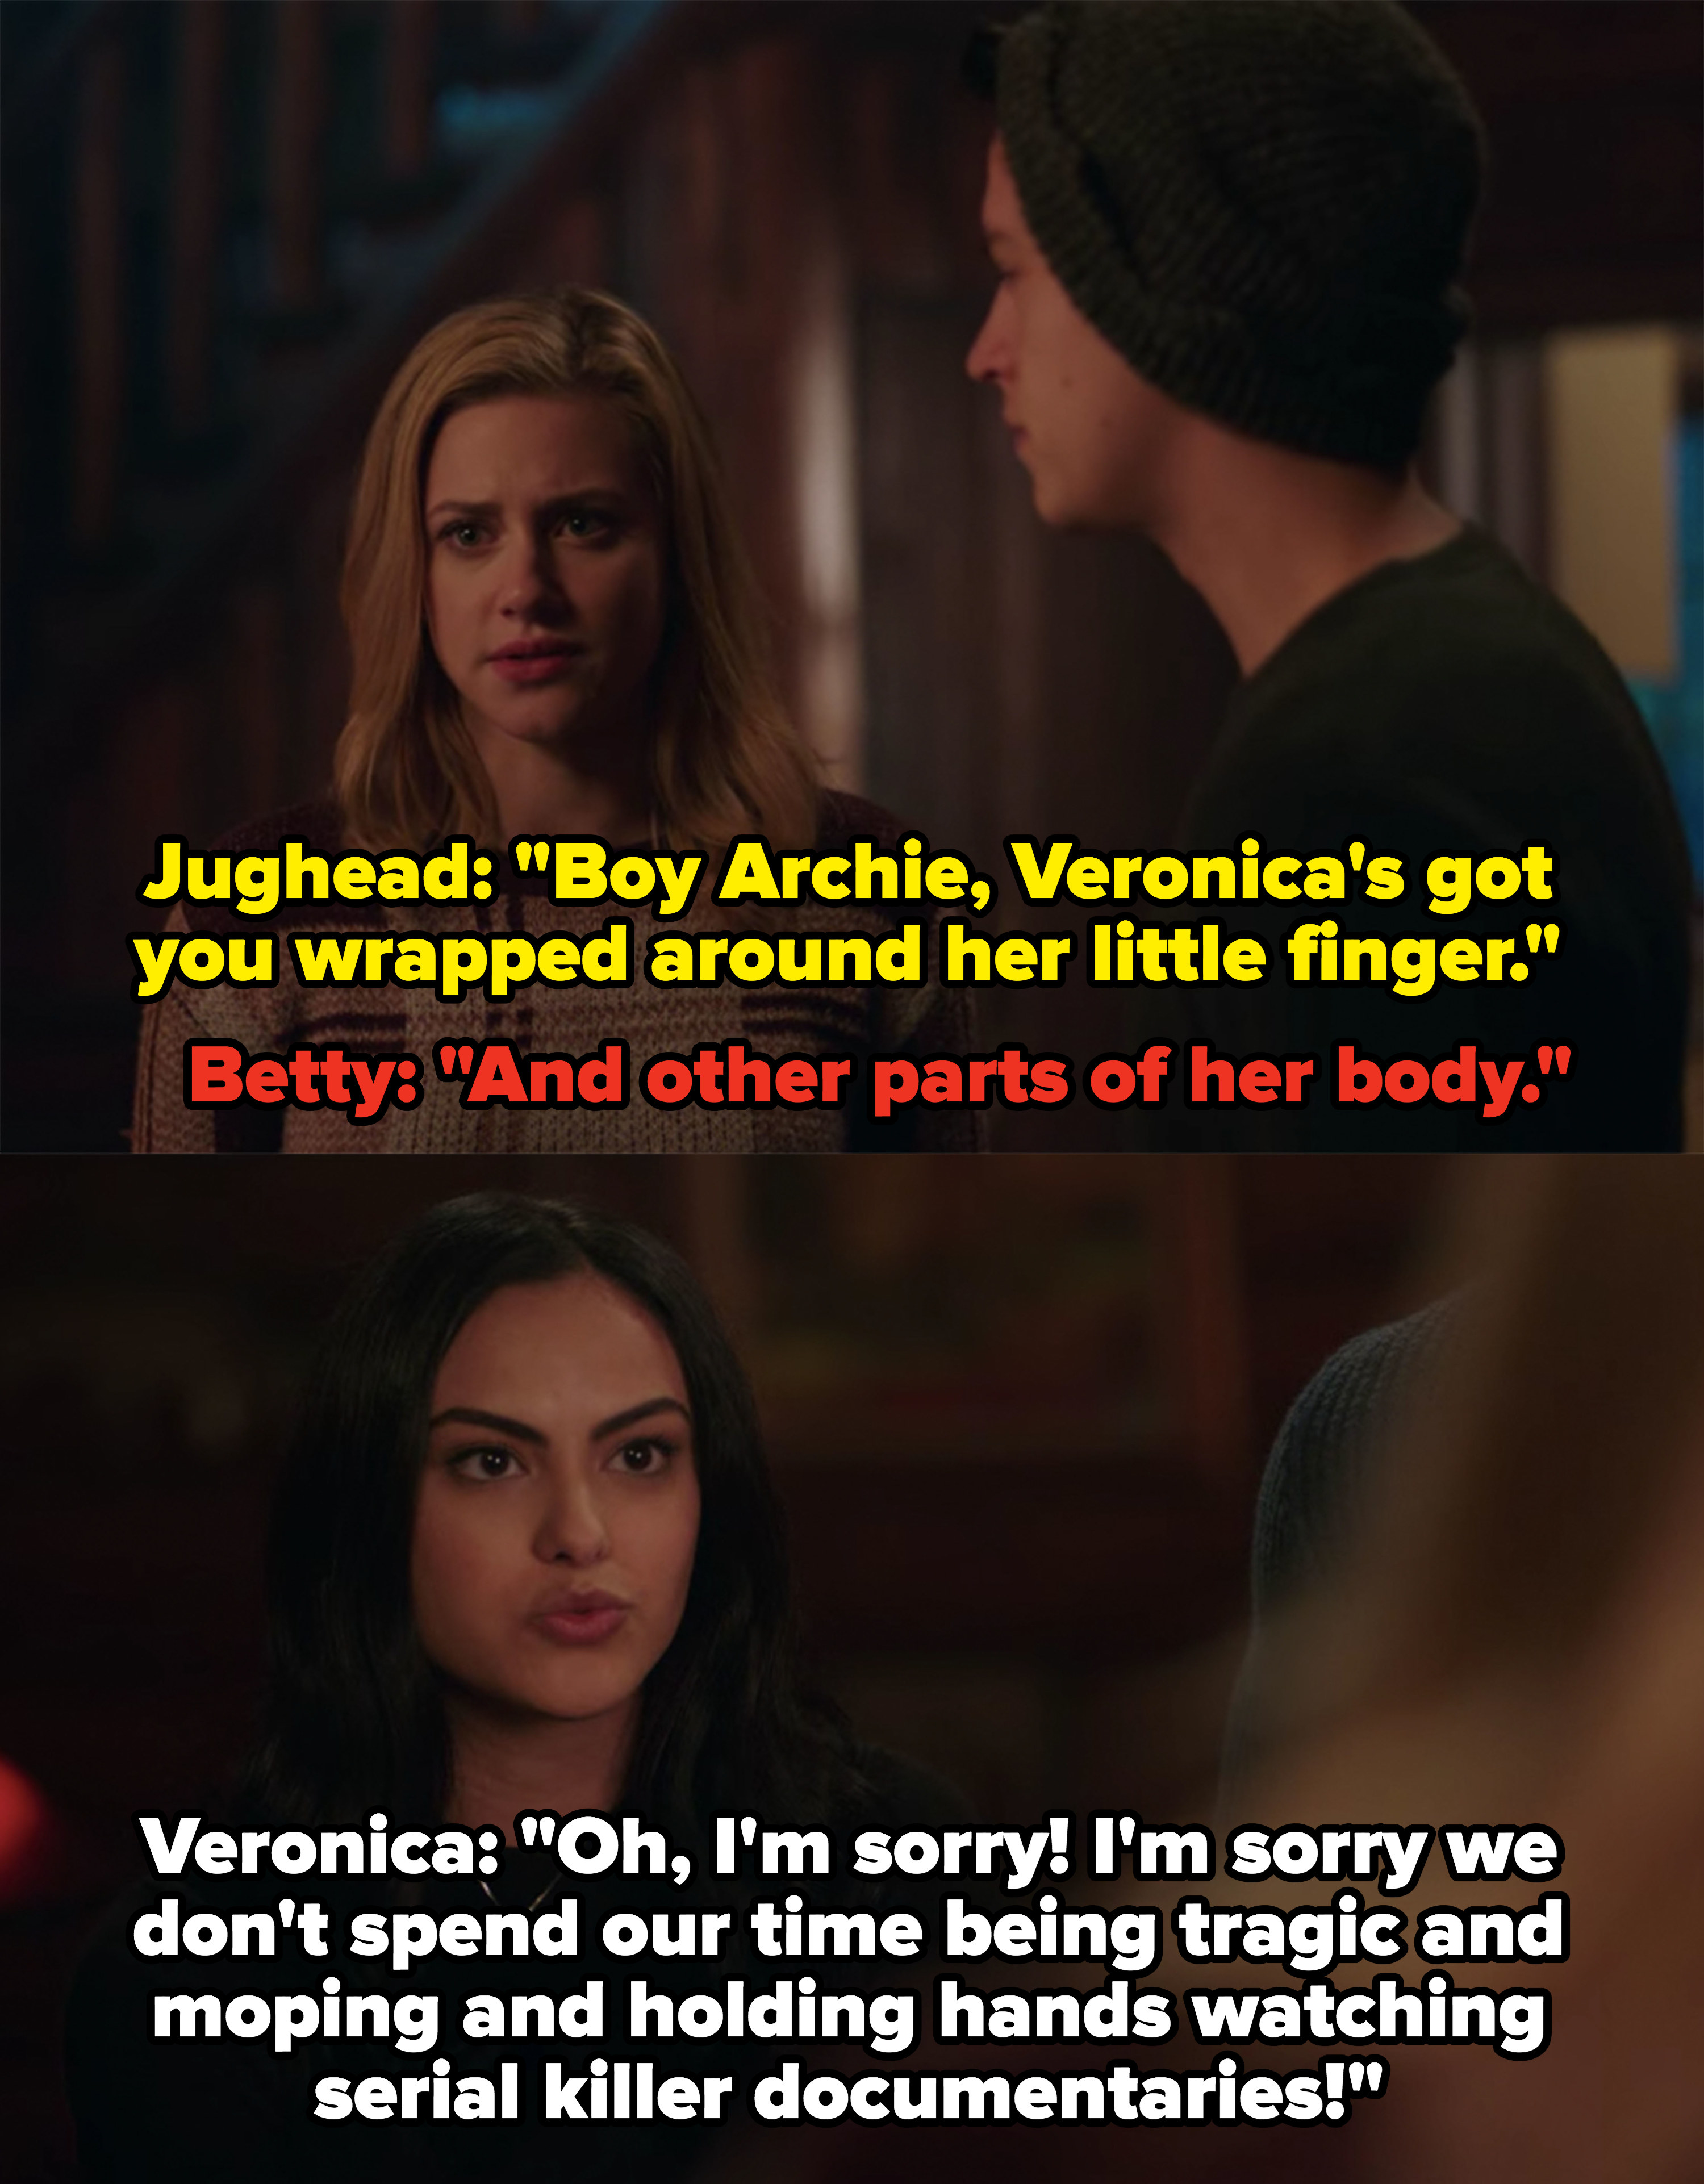 Veronica says she&#x27;s sorry she and Archie don&#x27;t spend their time &quot;being tragic and moping and holding hands watching serial killer documentaries&quot;